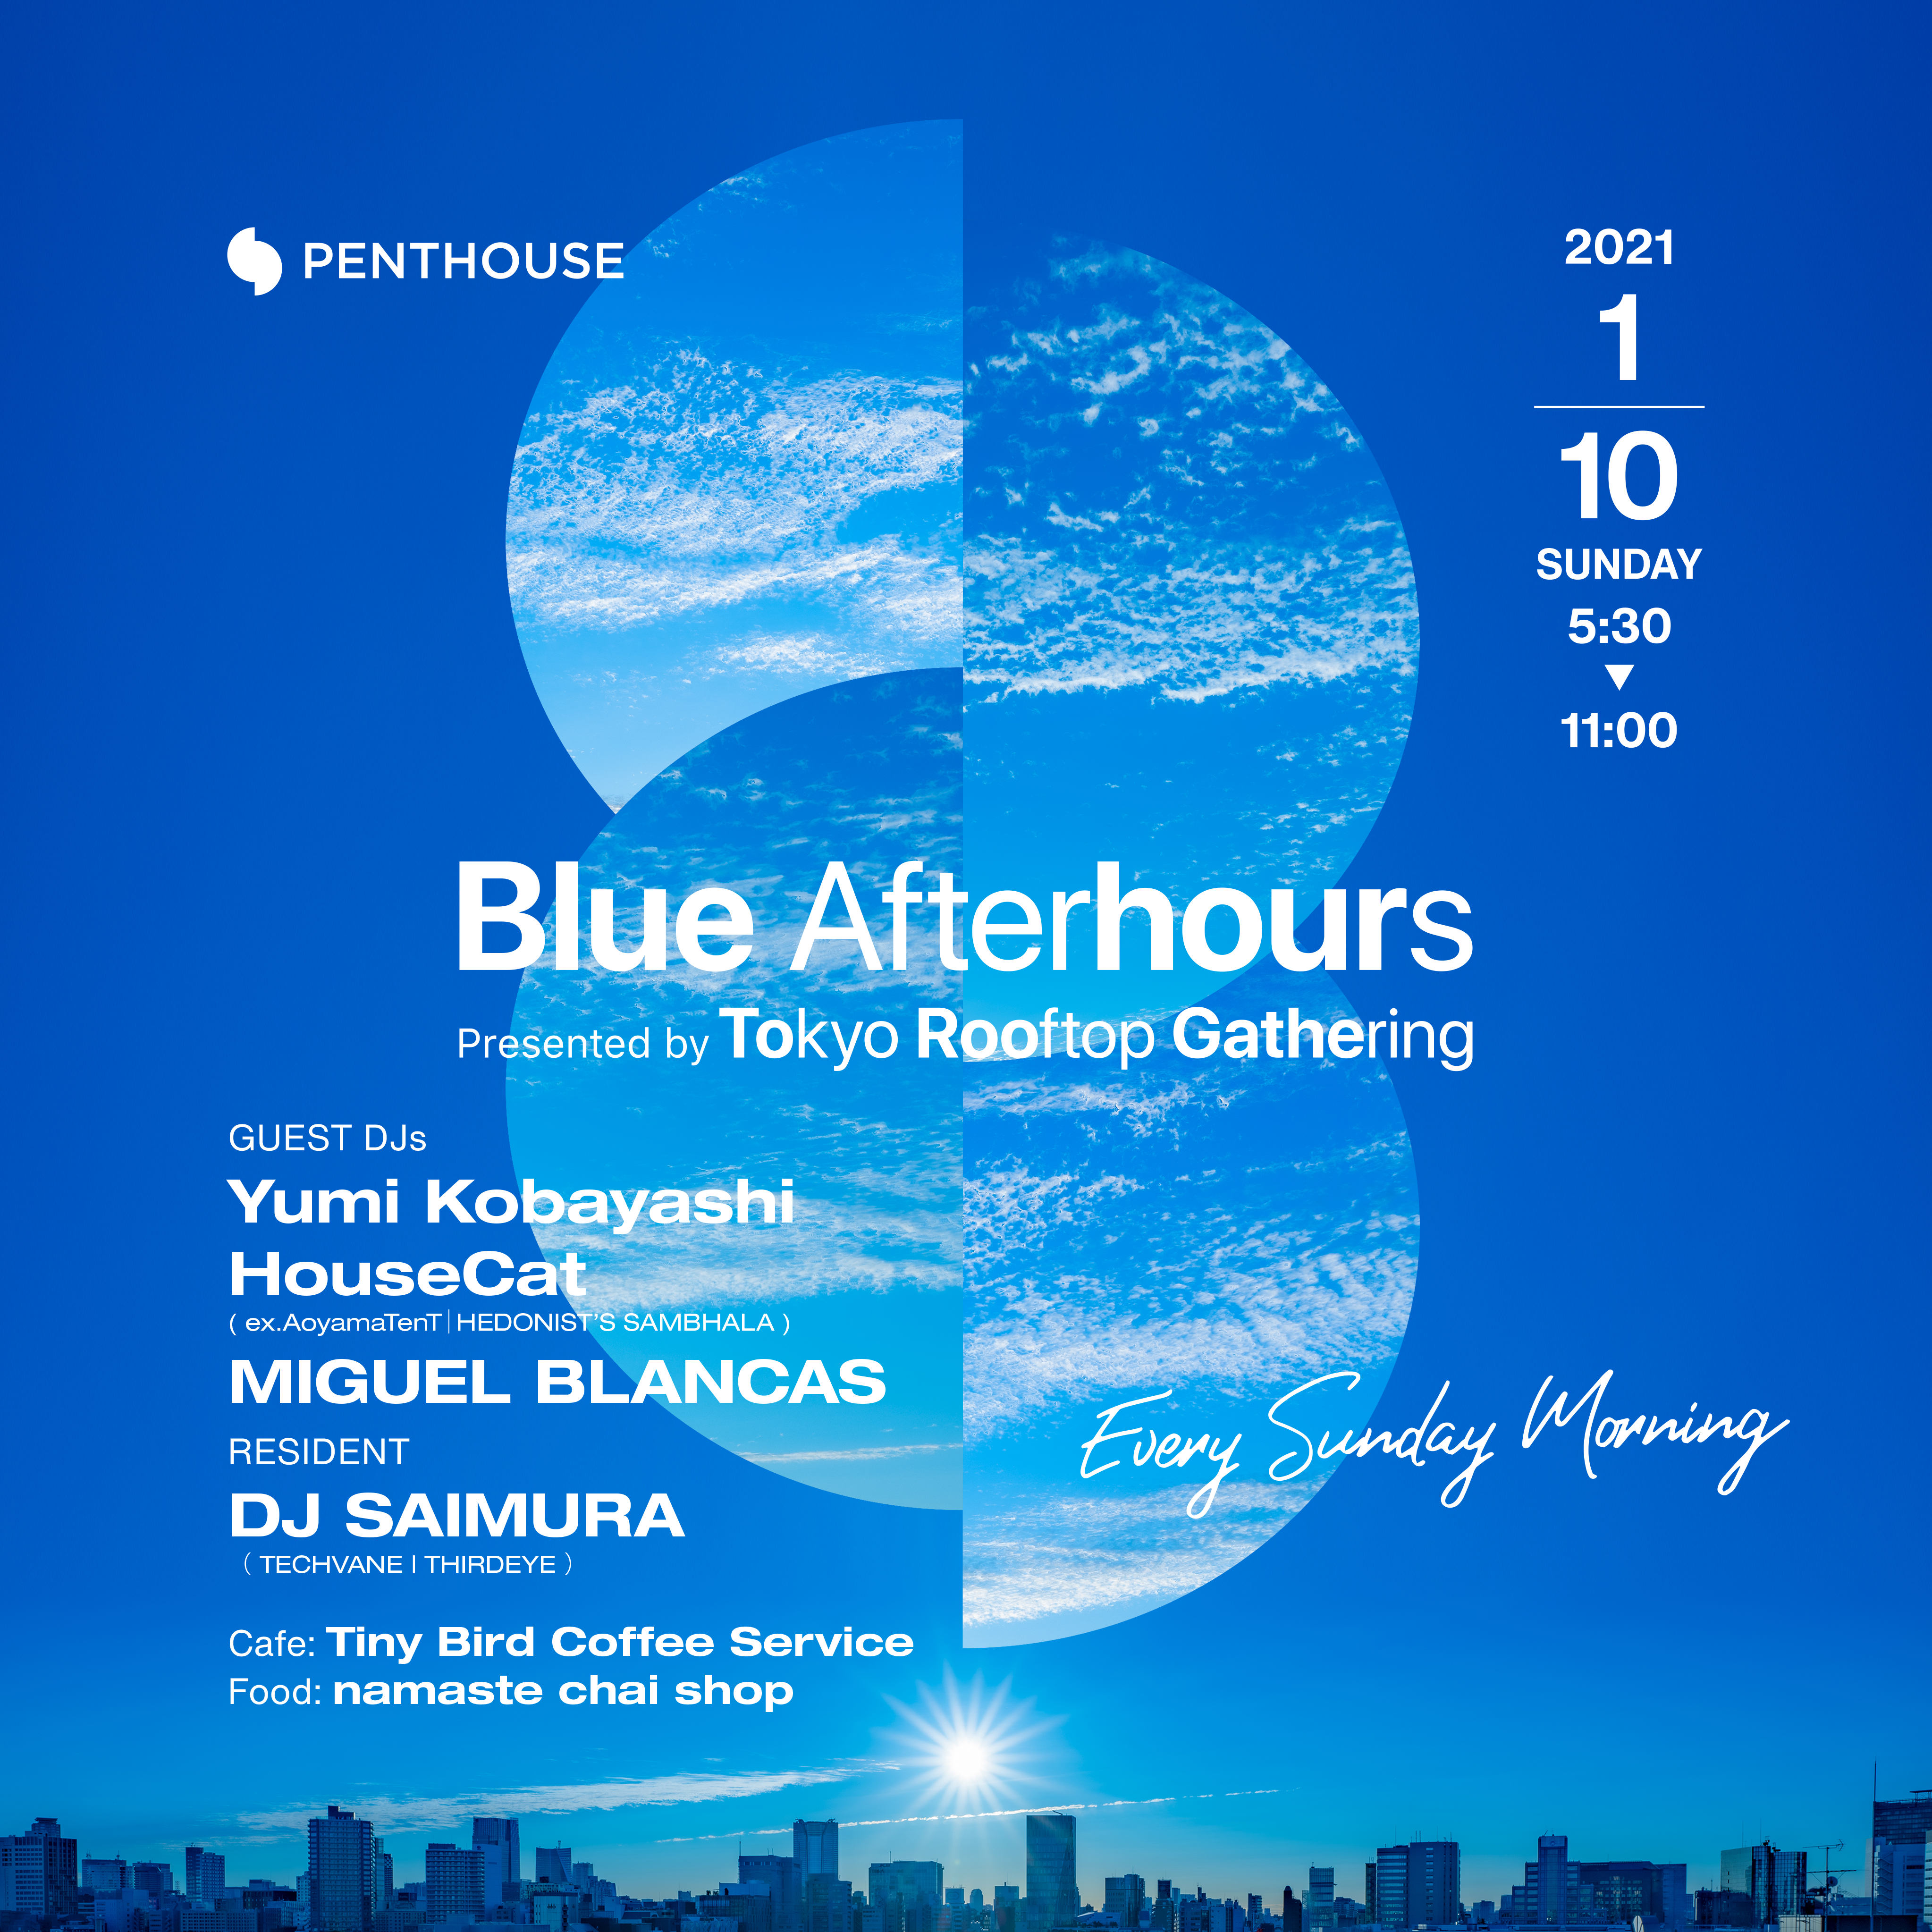 Blue Afterhours – Presented by Tokyo Rooftop Gathering